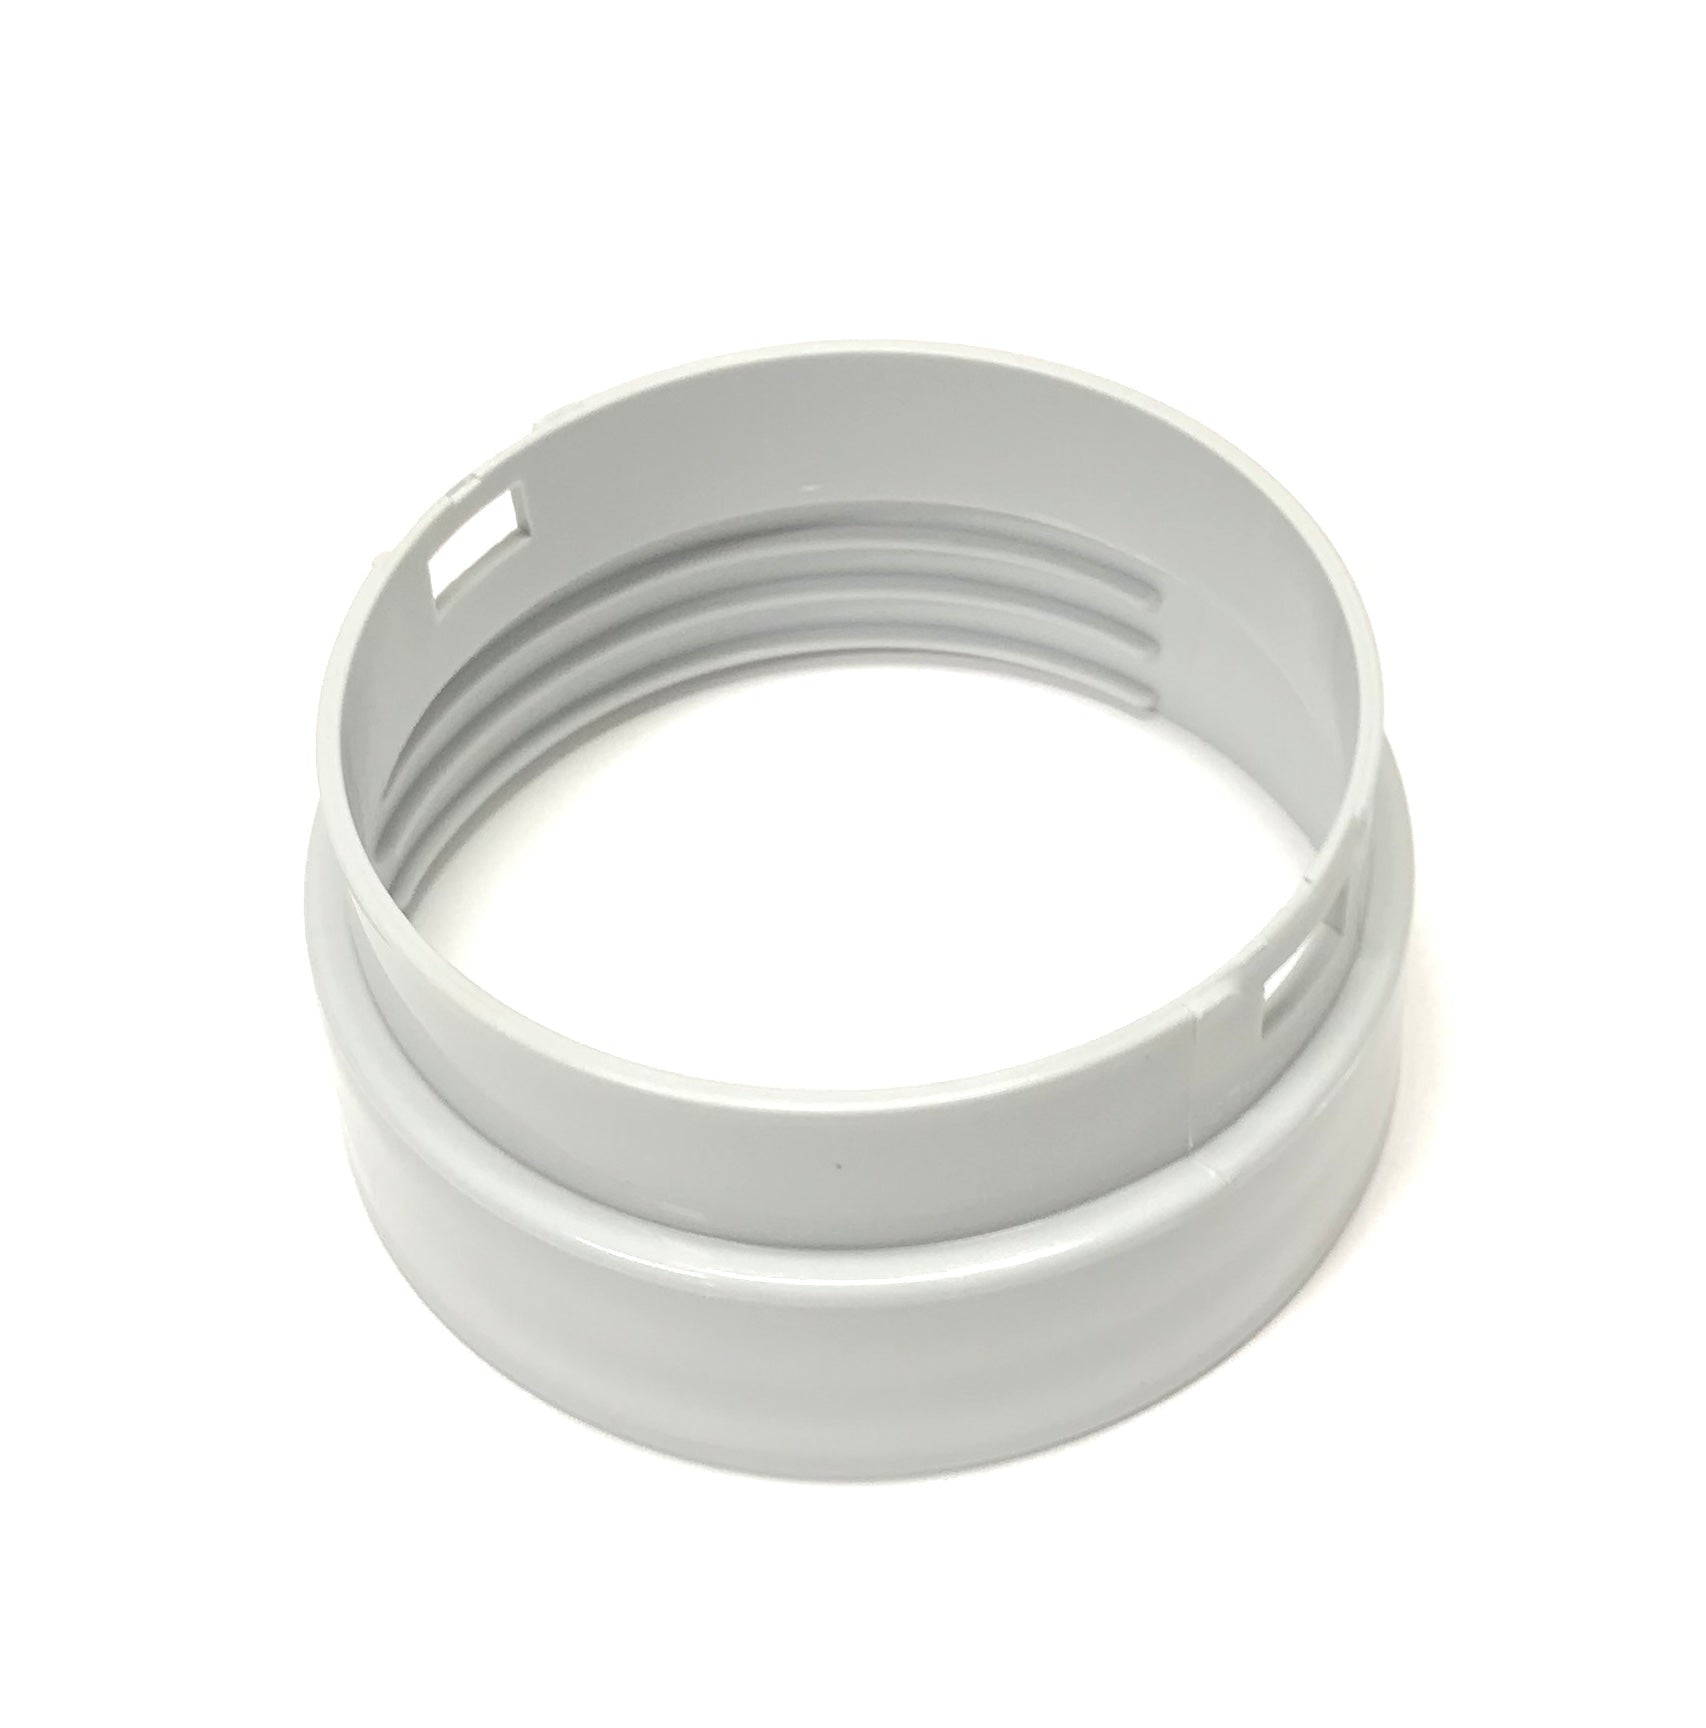 OEM Danby Air Conditioner AC Exhaust Hose Connector Originally Shipped With DPAC7099, DPAC70991